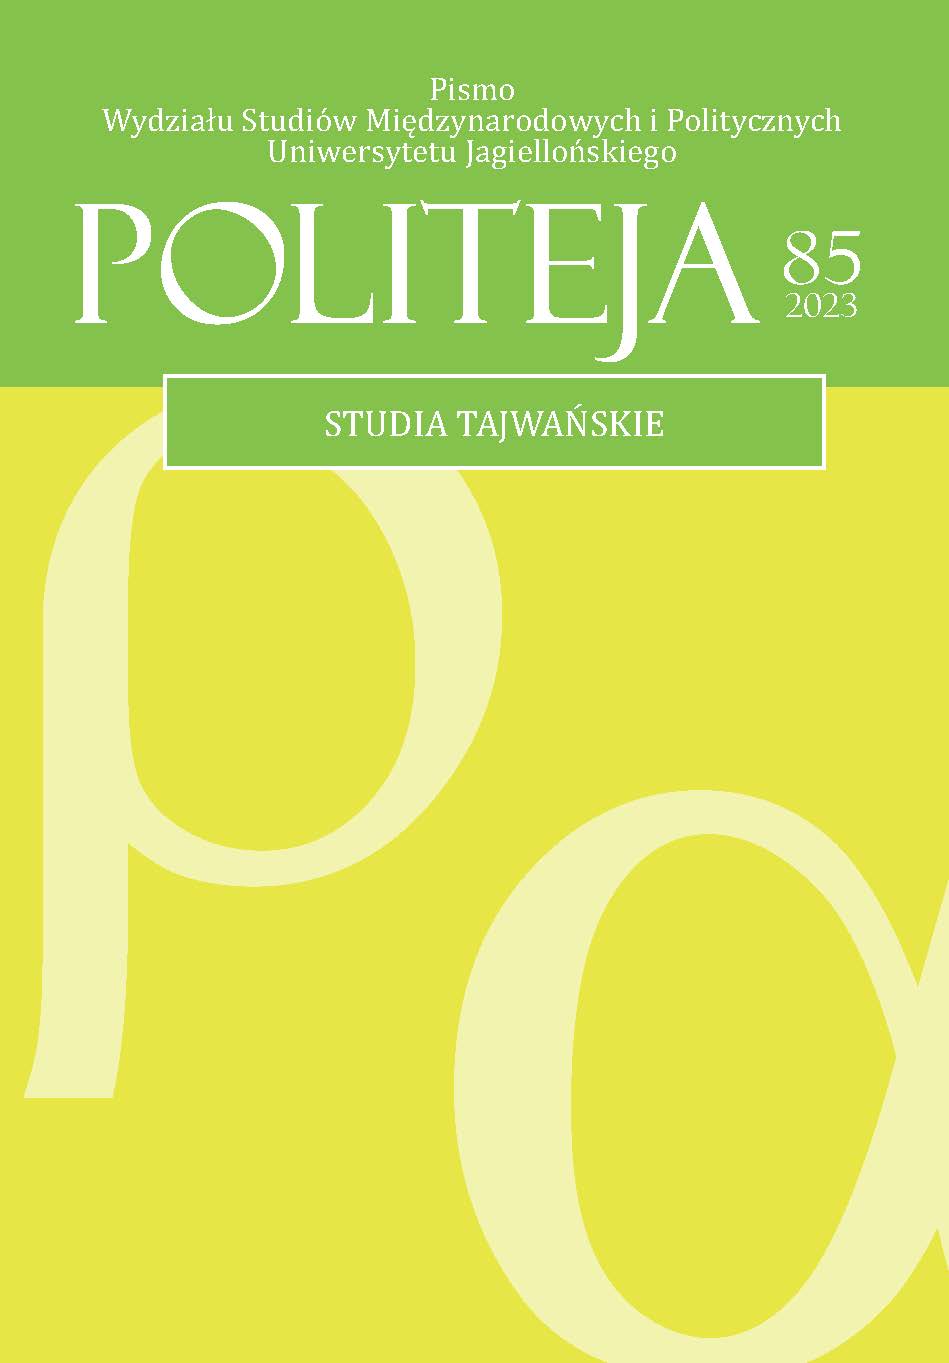 New Contexts in the Policy of Poland, the Czech Republic and Lithuania Towards Taiwan Following Russia’s Aggression against Ukraine Cover Image